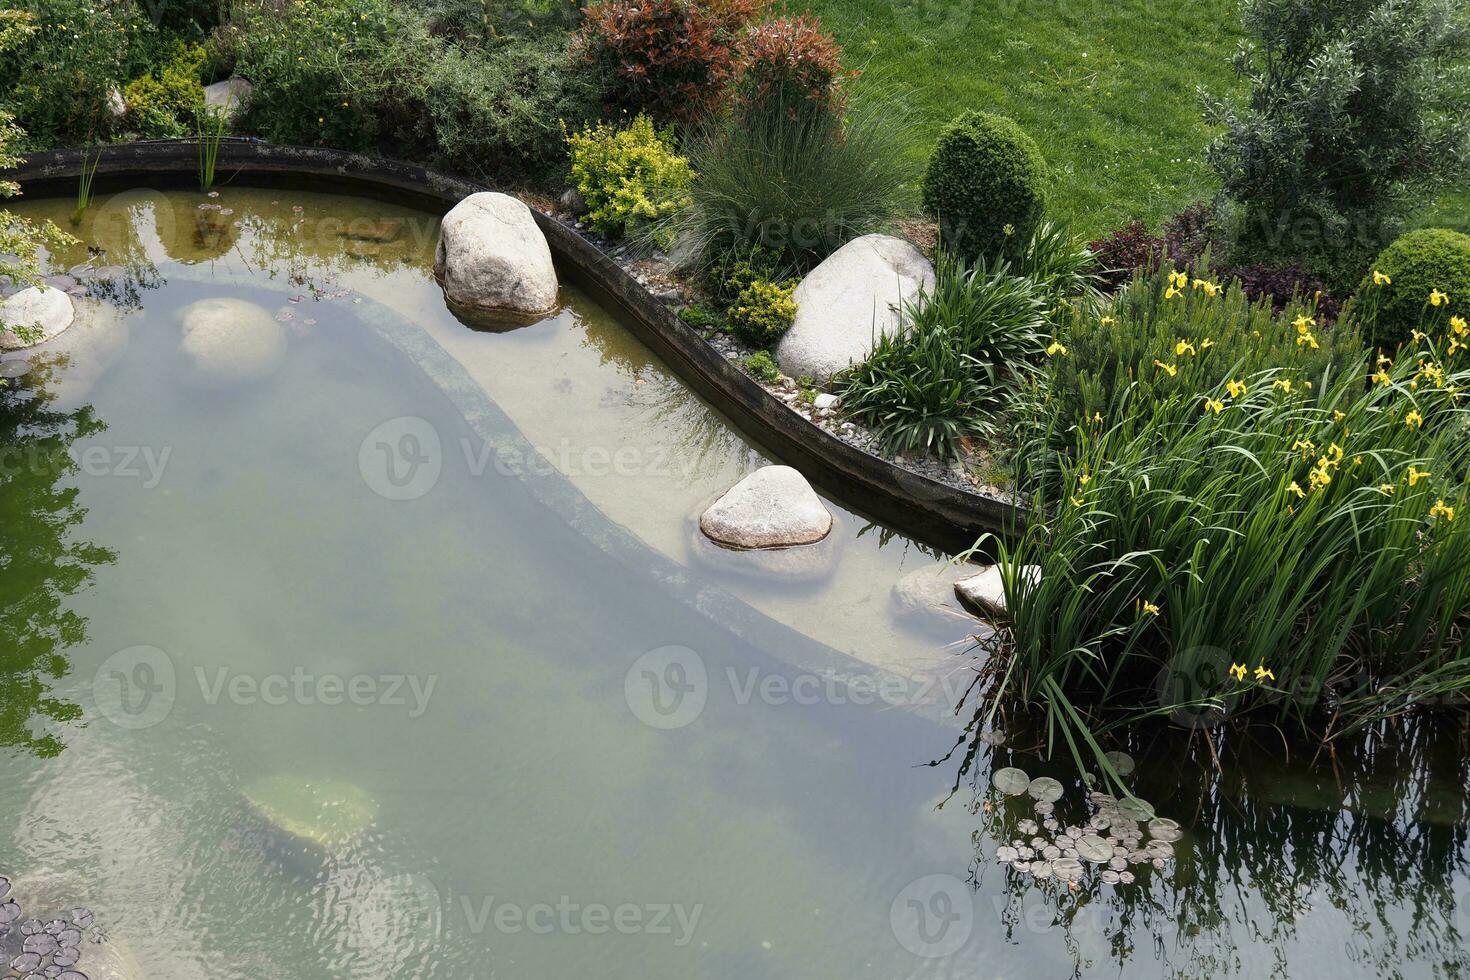 Decorative plants in a small pond with trees around photo